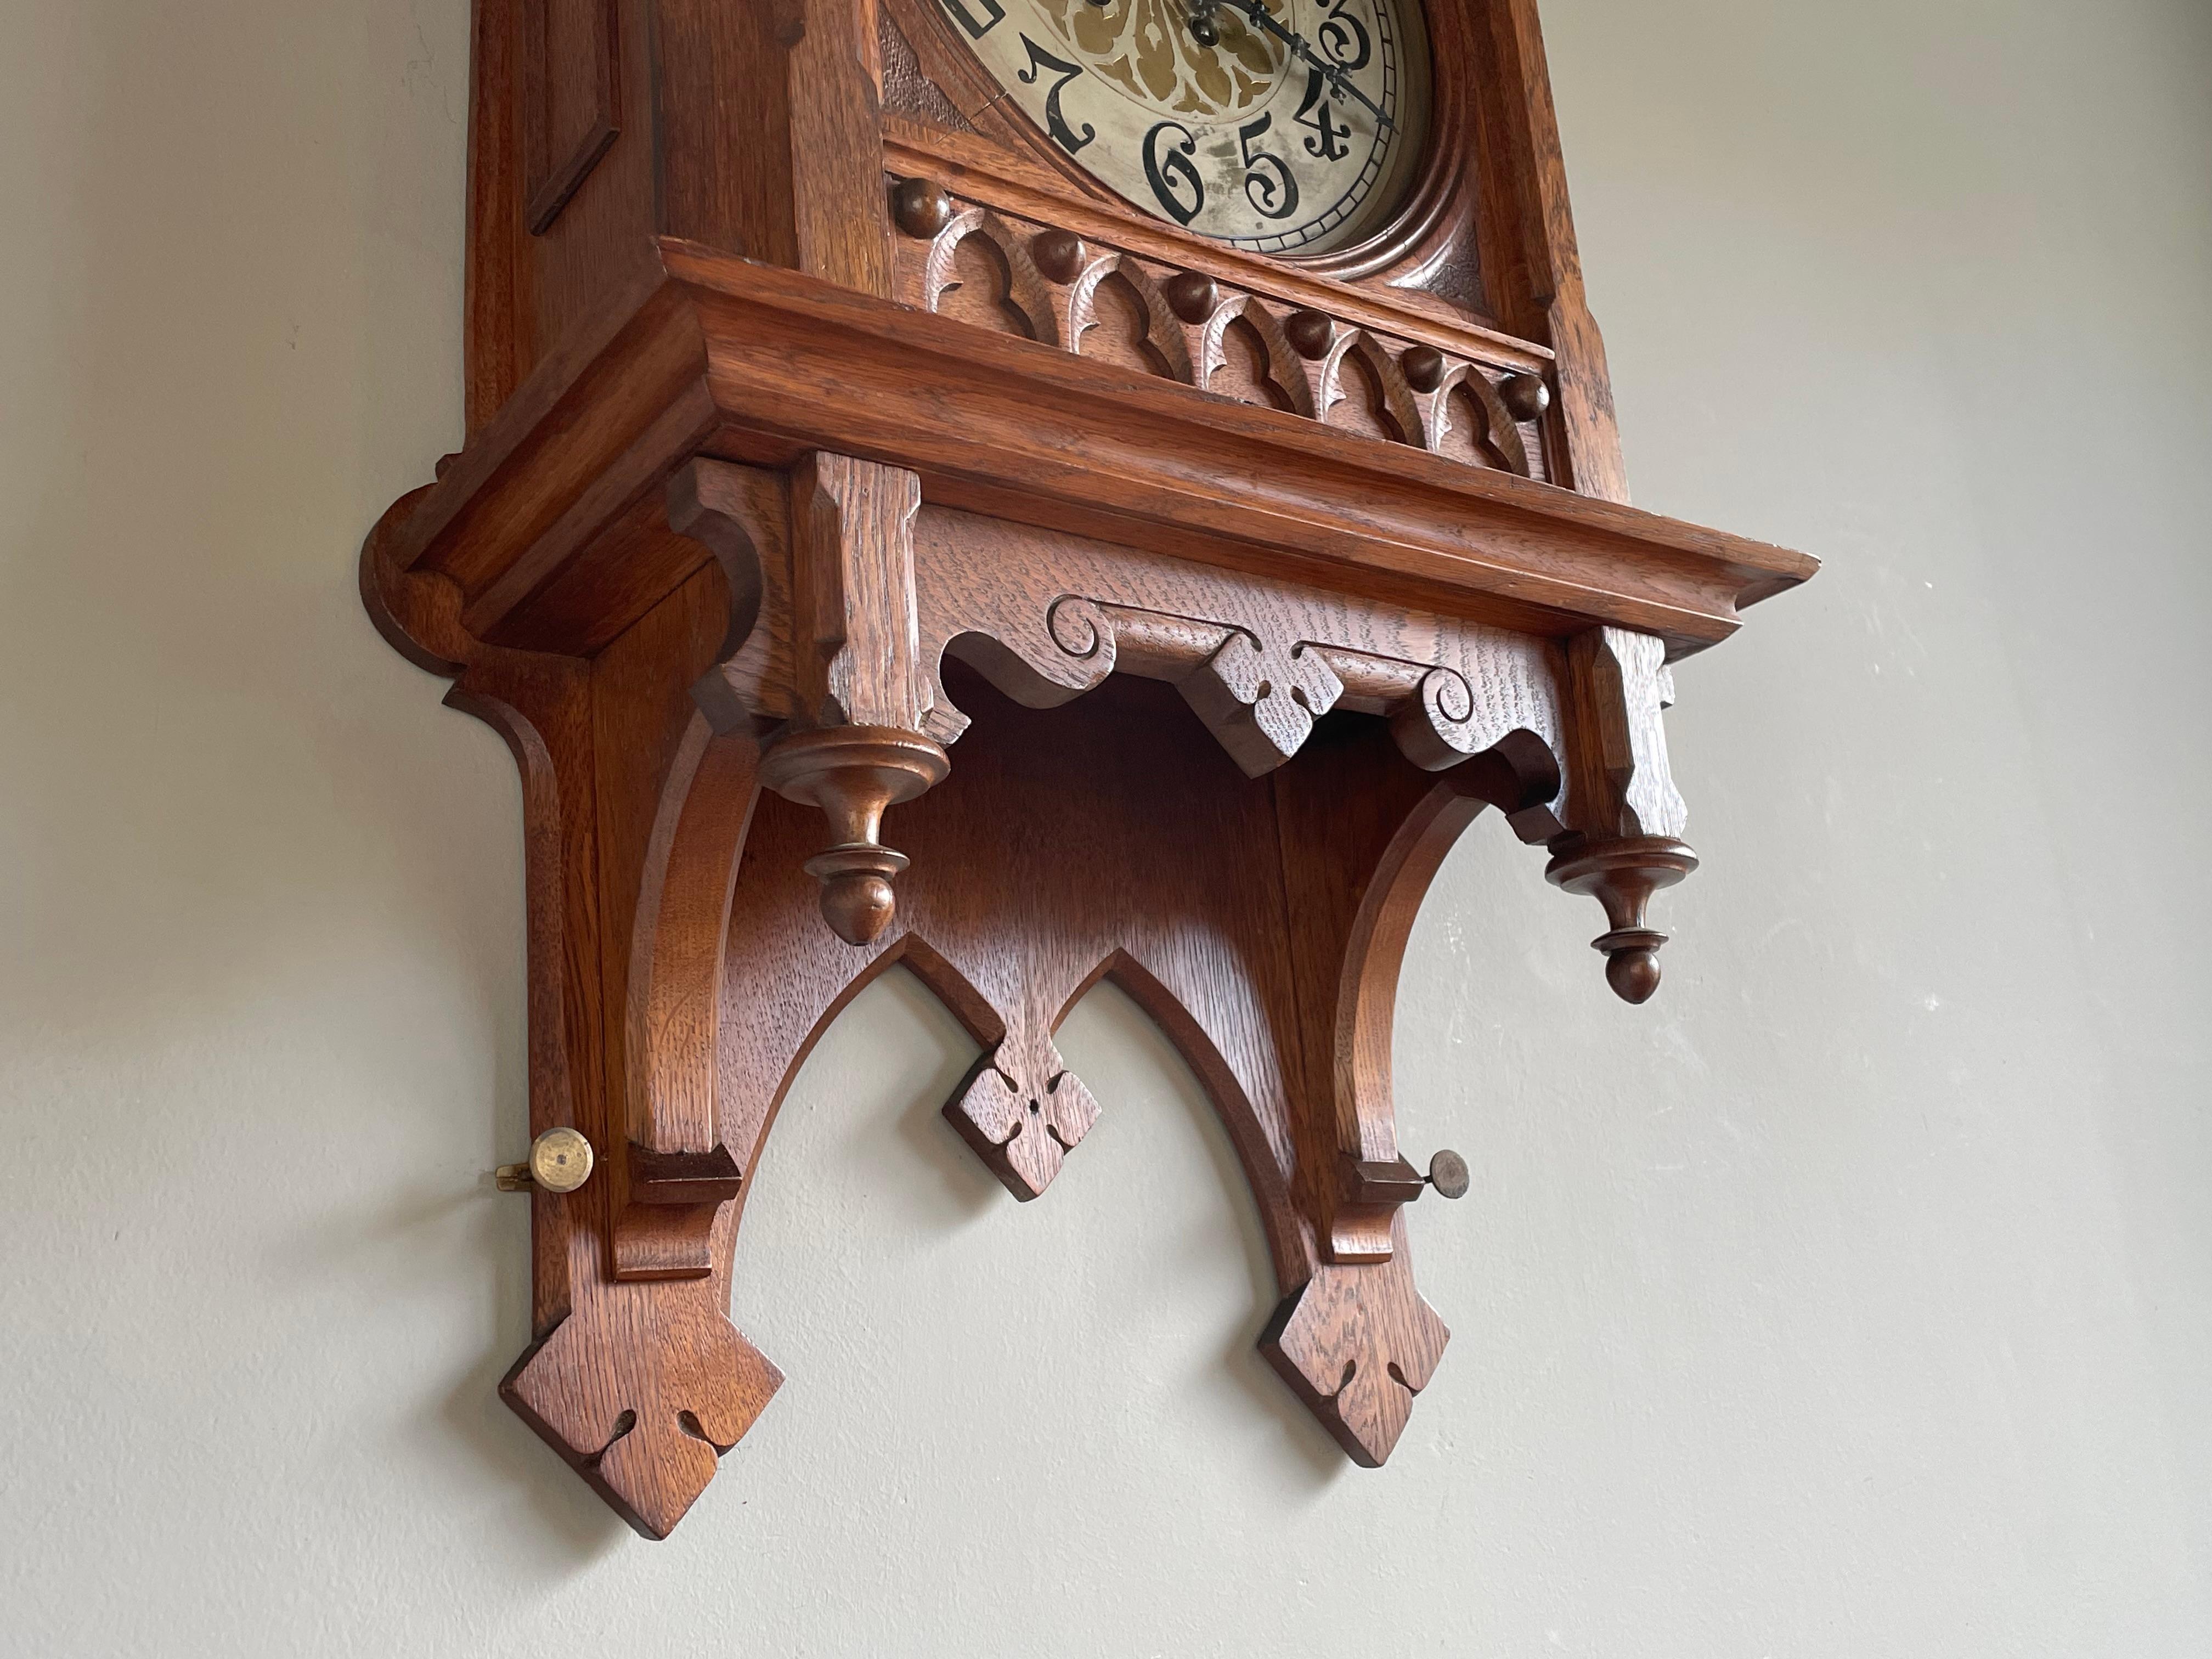 20th Century Rare & Large Antique Hand Carved Gothic Revival Wall Clock w. Lenzkirch Movement